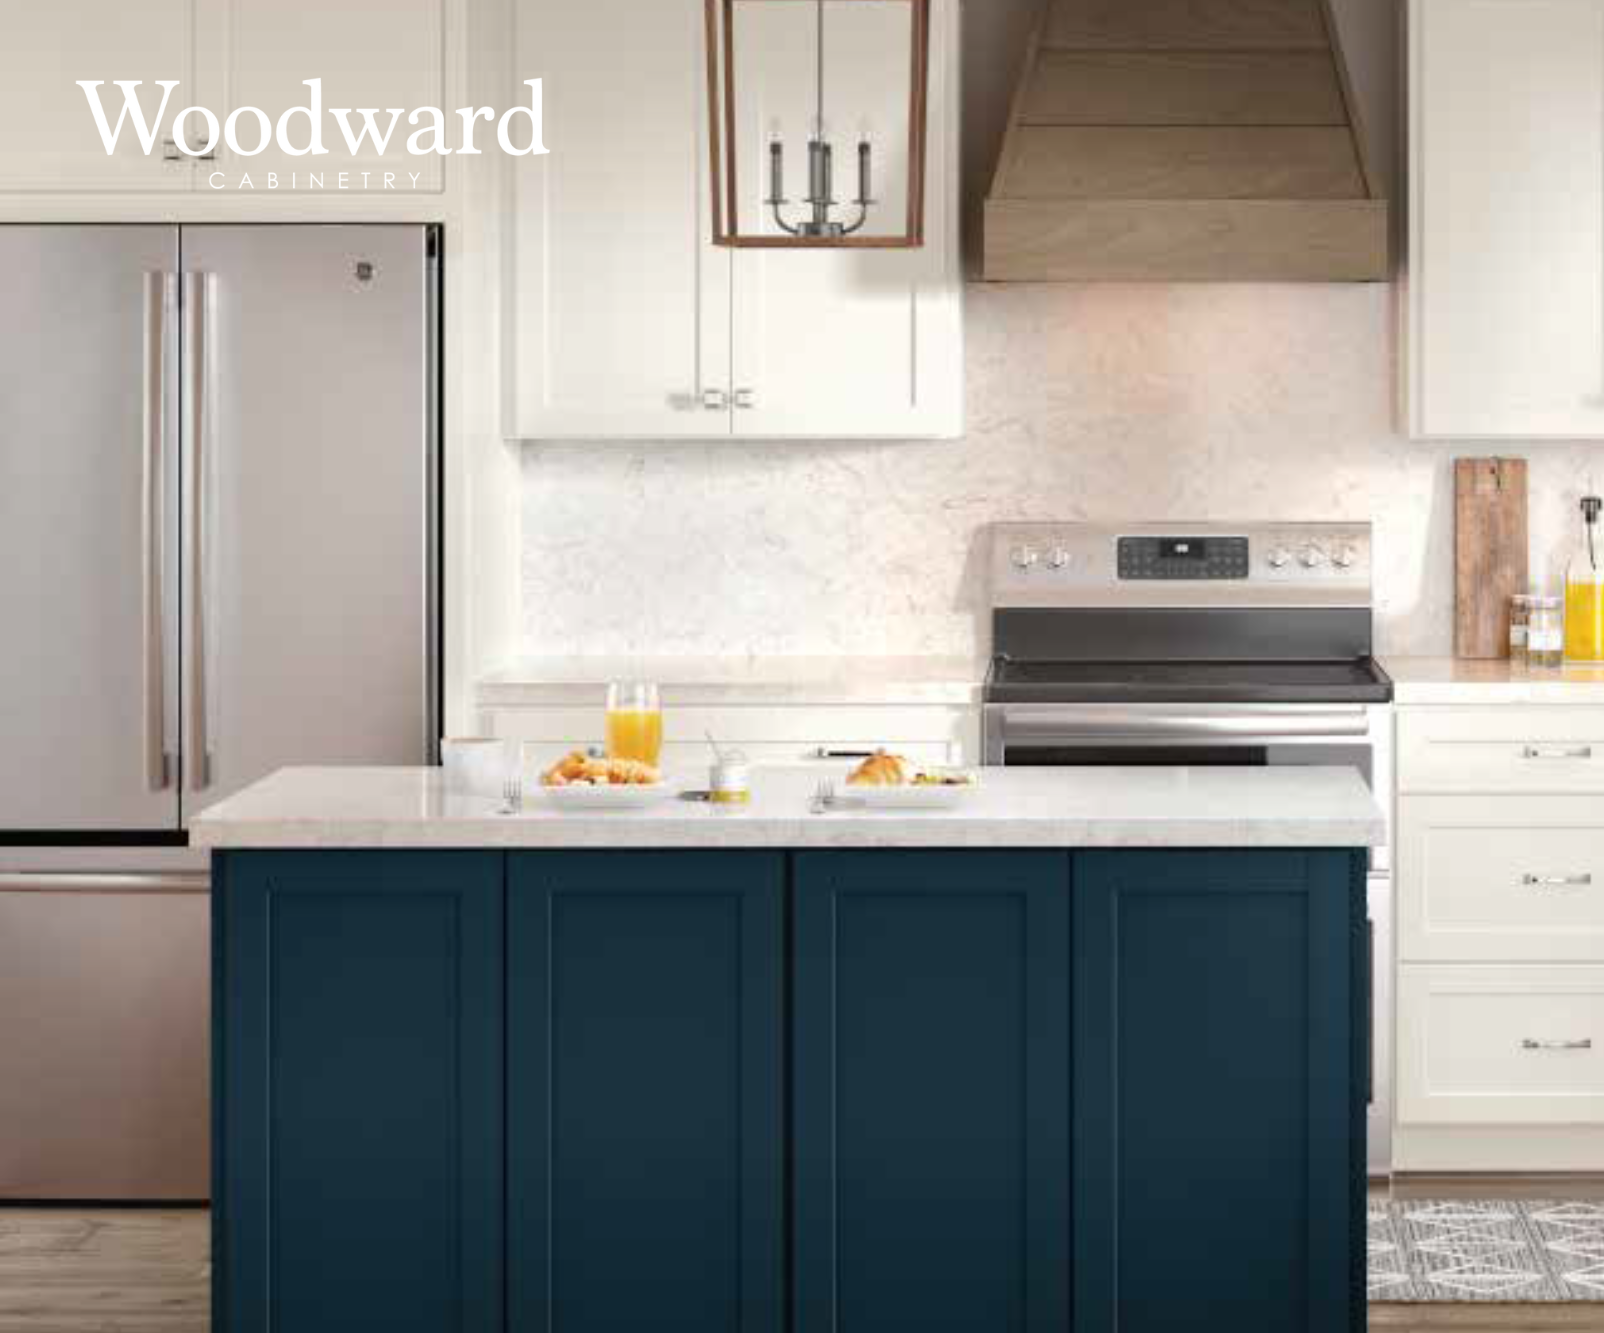 Embracing Warm Tones and Color with Woodward Cabinetry